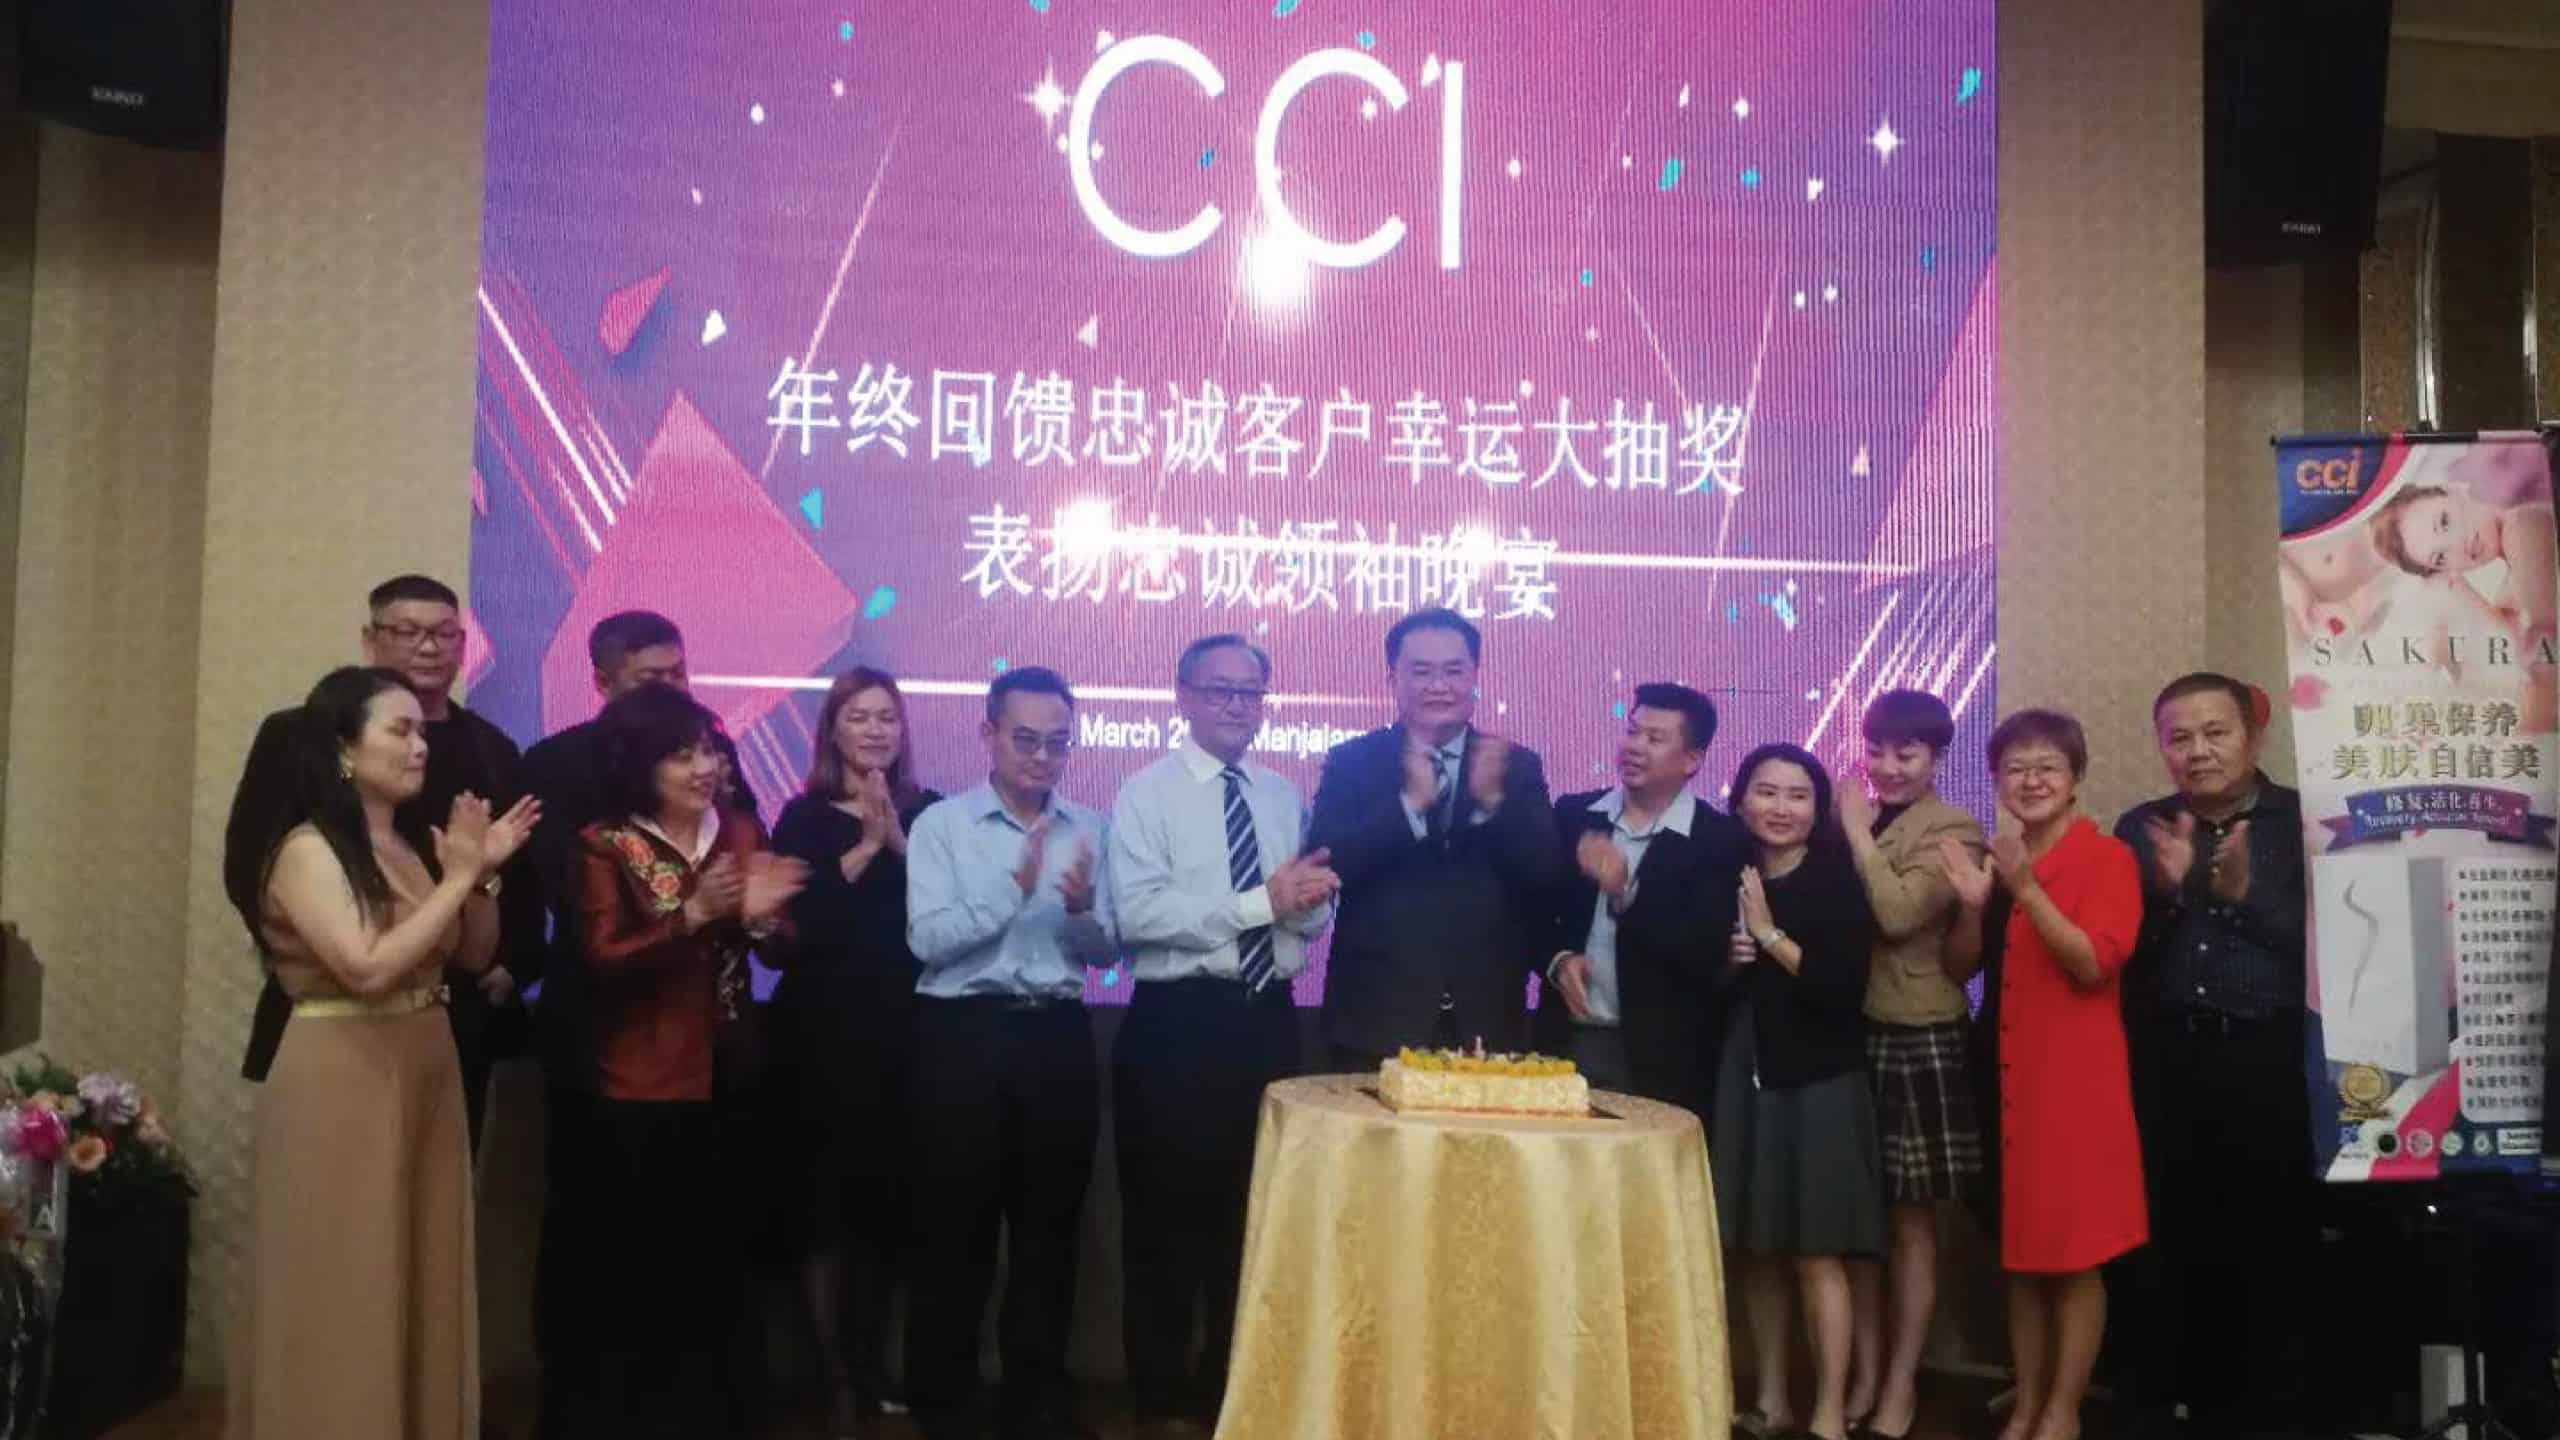 CCI Capital Gallery - Annual Year Lucky Draw